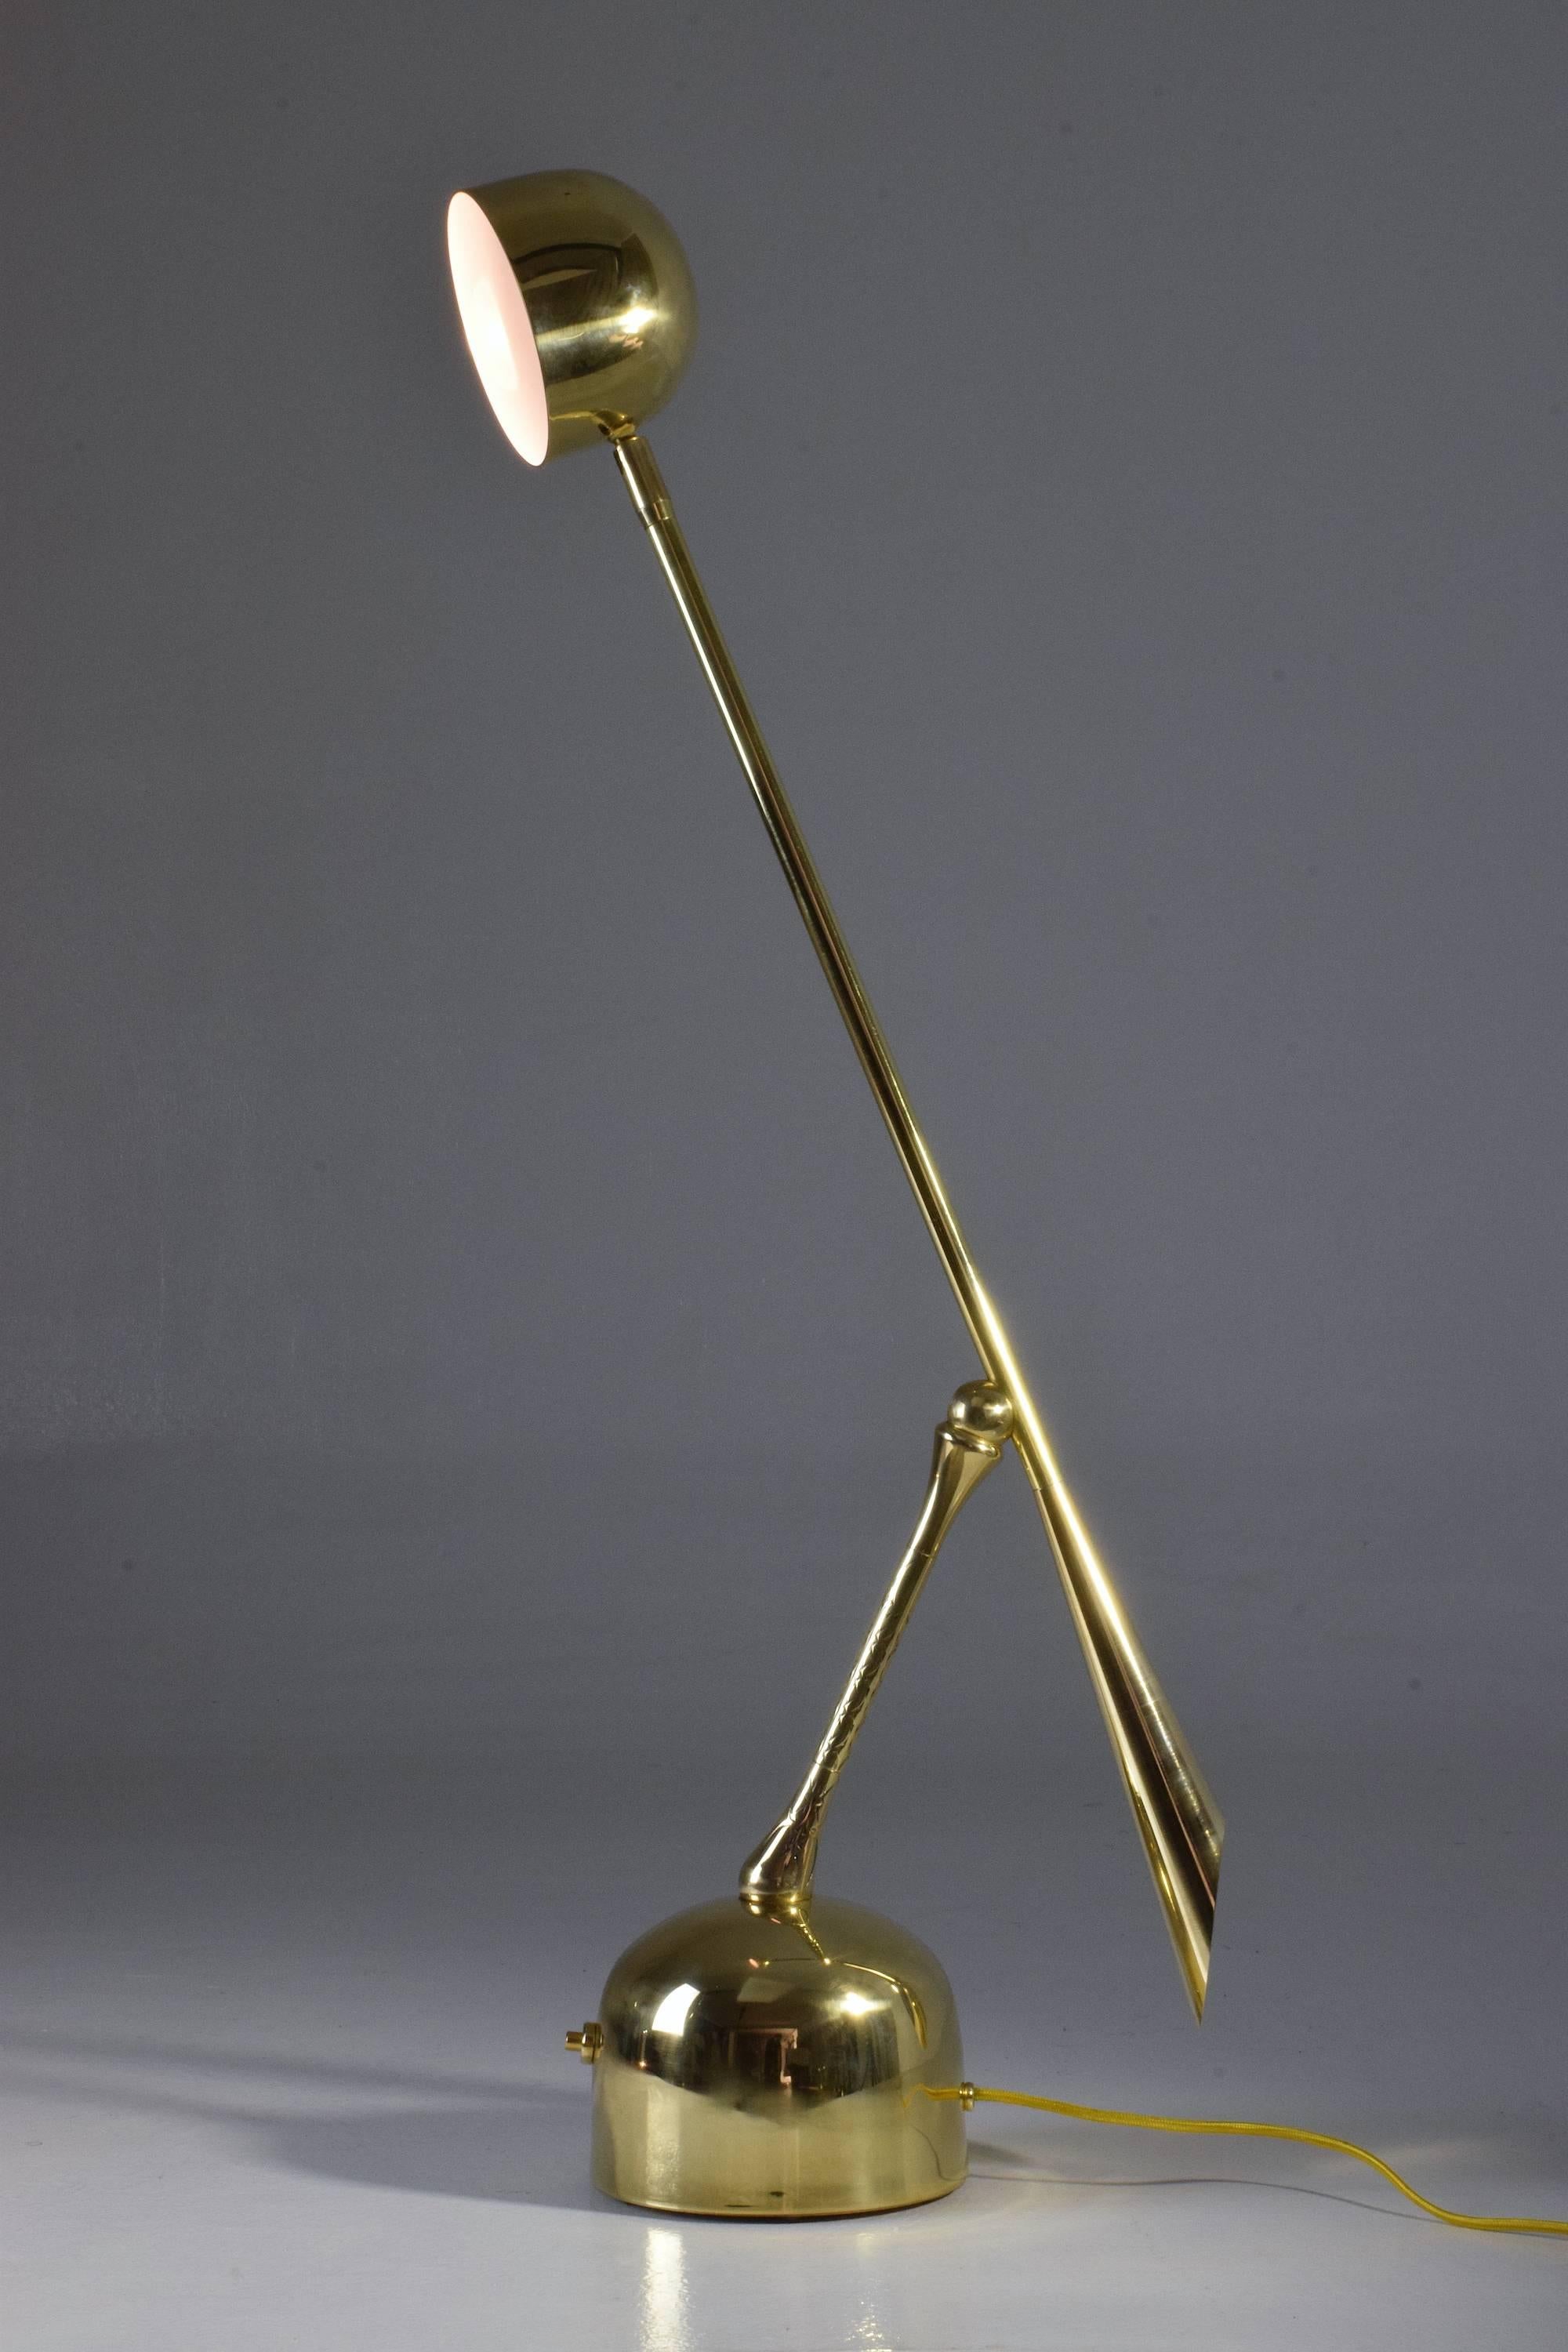 Modern Continuum-II Contemporary Articulating Brass Table Lamp, Flow Collection